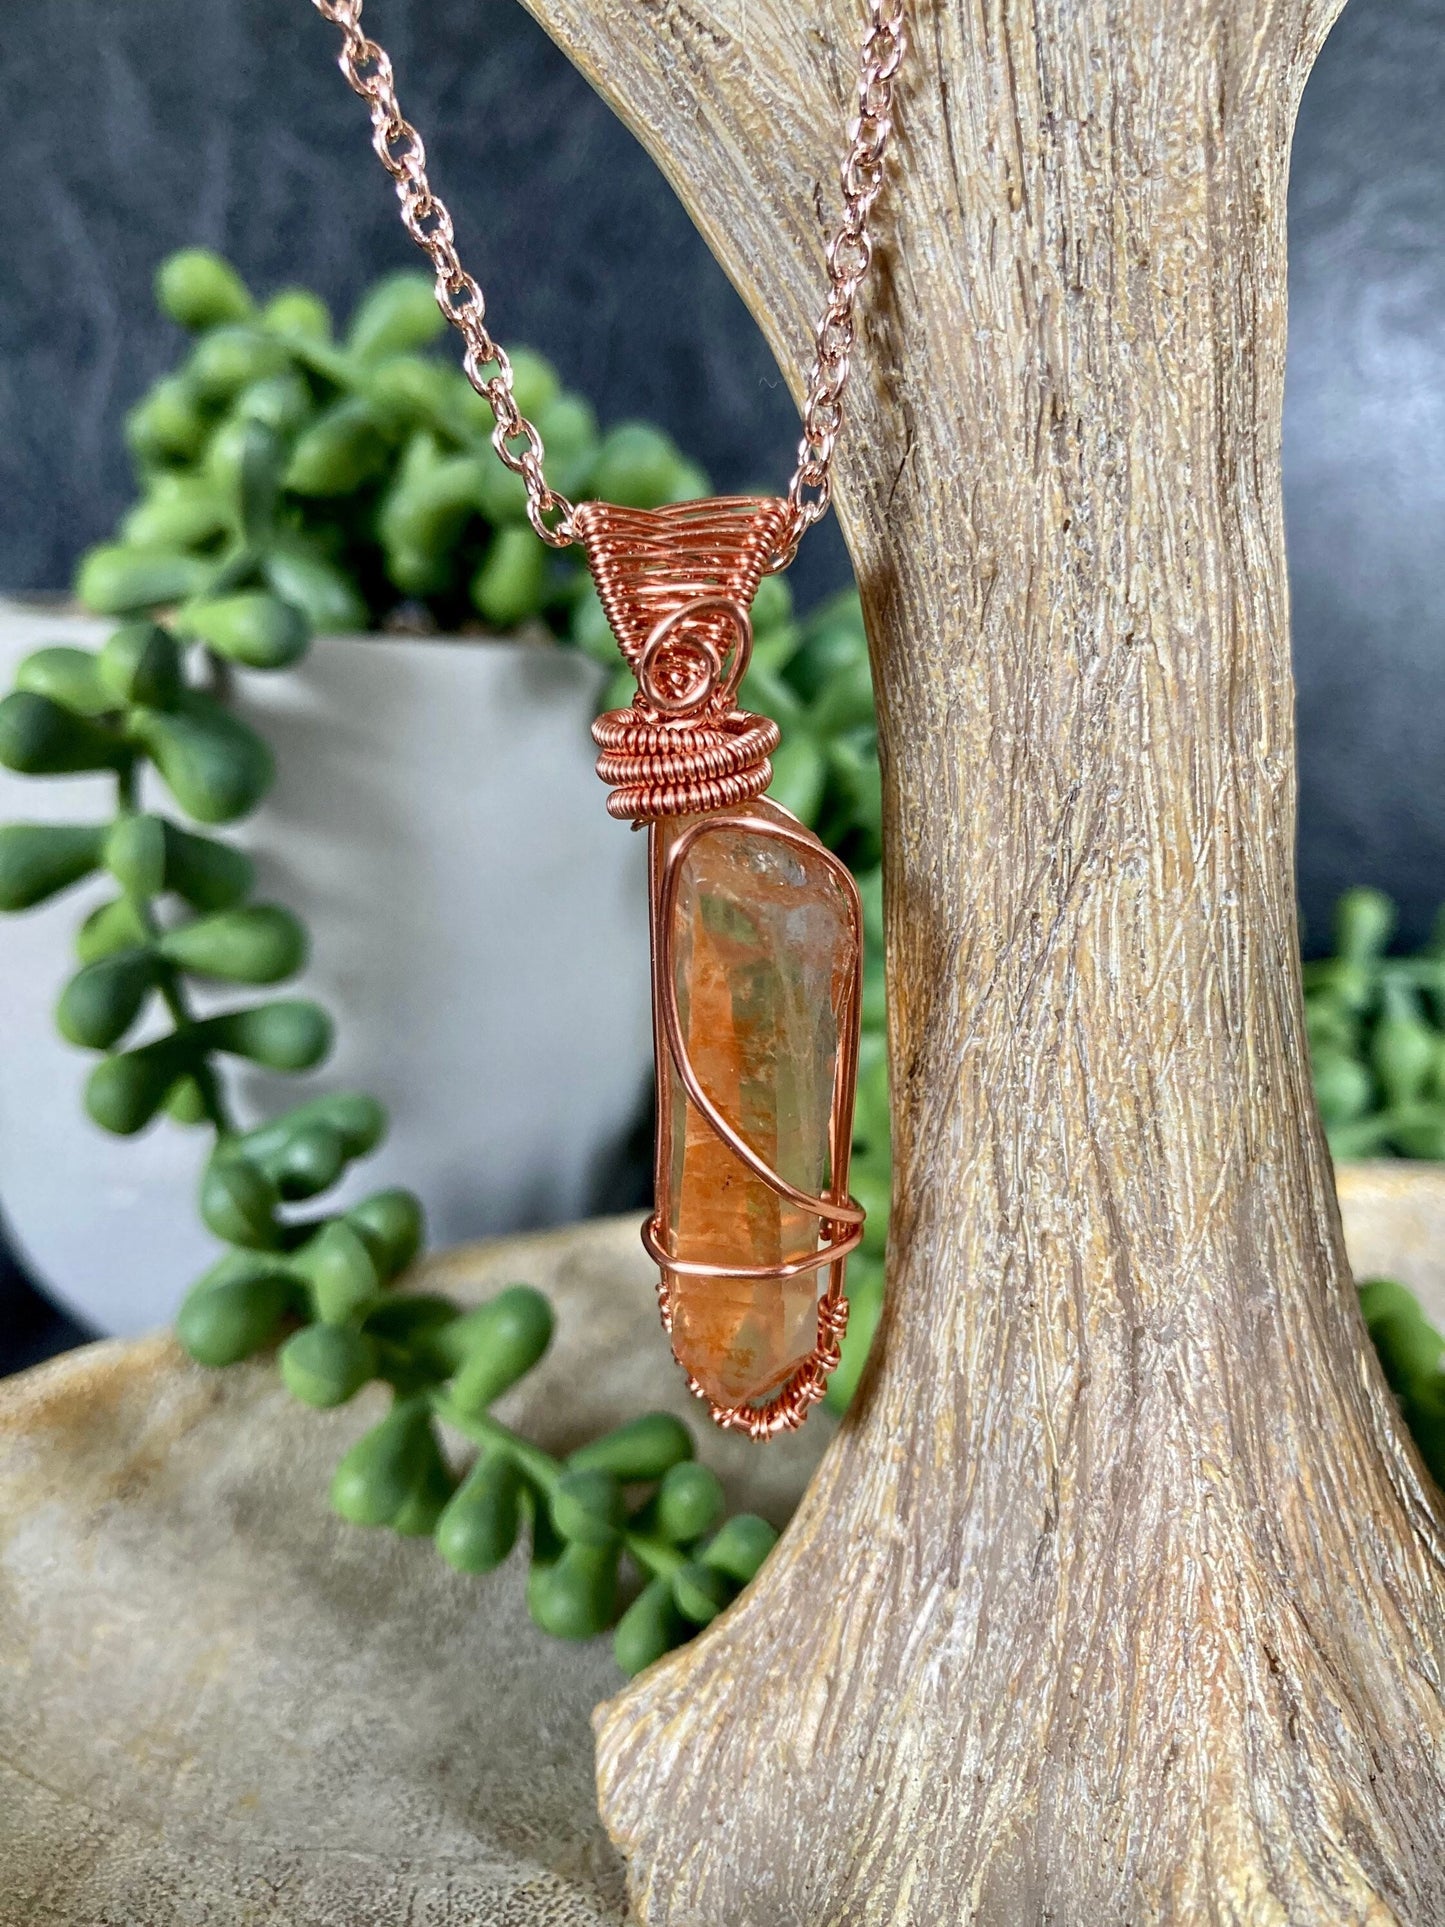 Tangerine quartz pendant handmade necklace wire wrapped natural stone with 18 inch length chain